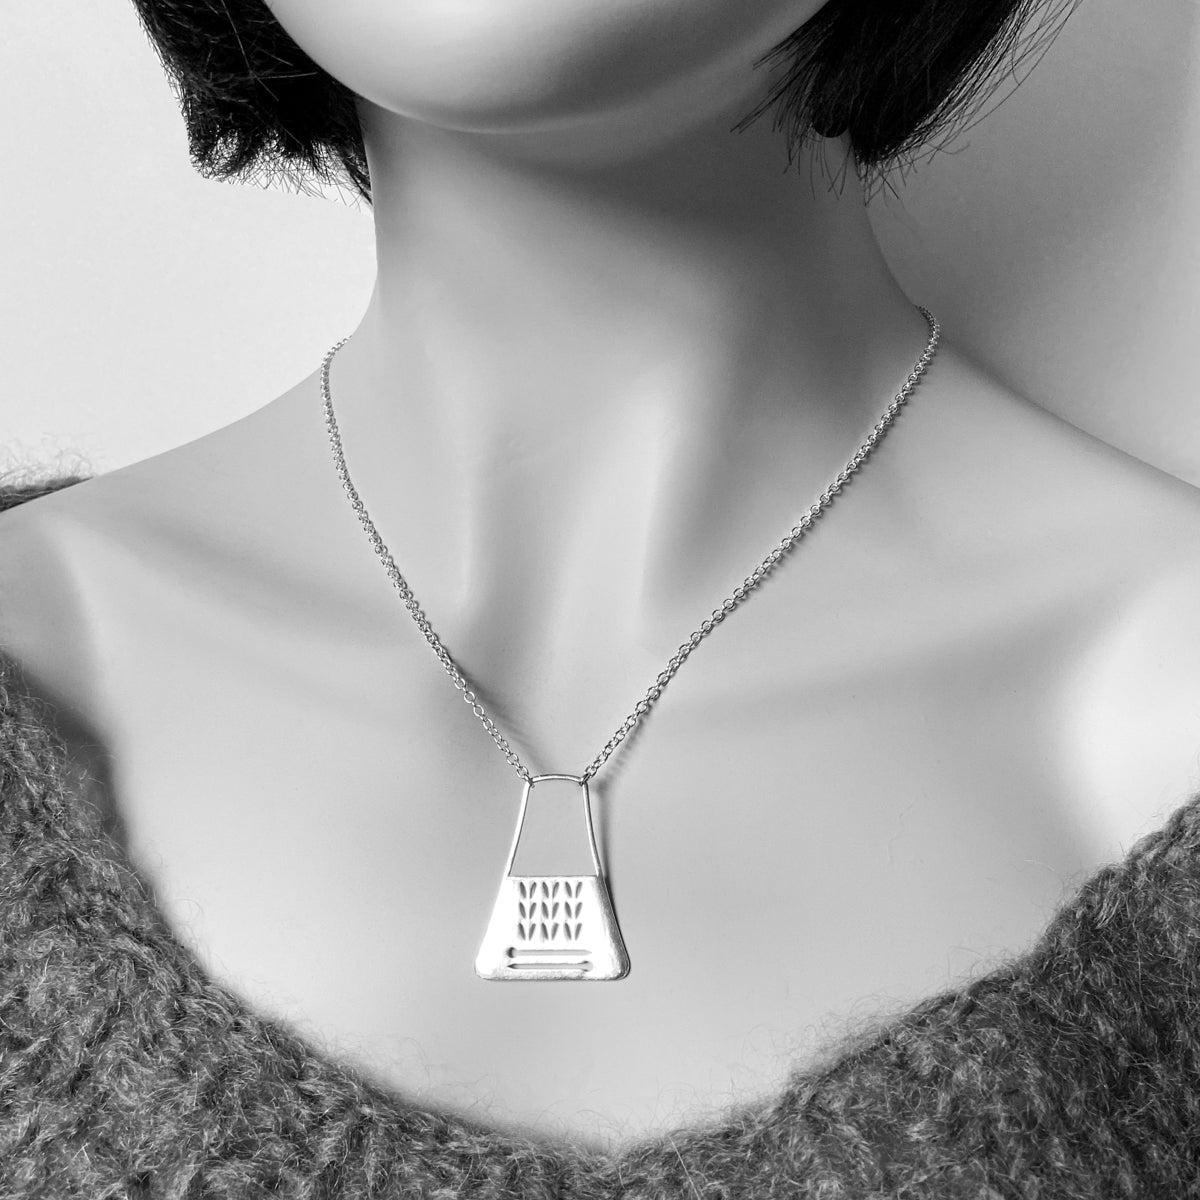 Stockinette Walking Project Bag Necklace in Sterling Silver for Yarn Lovers